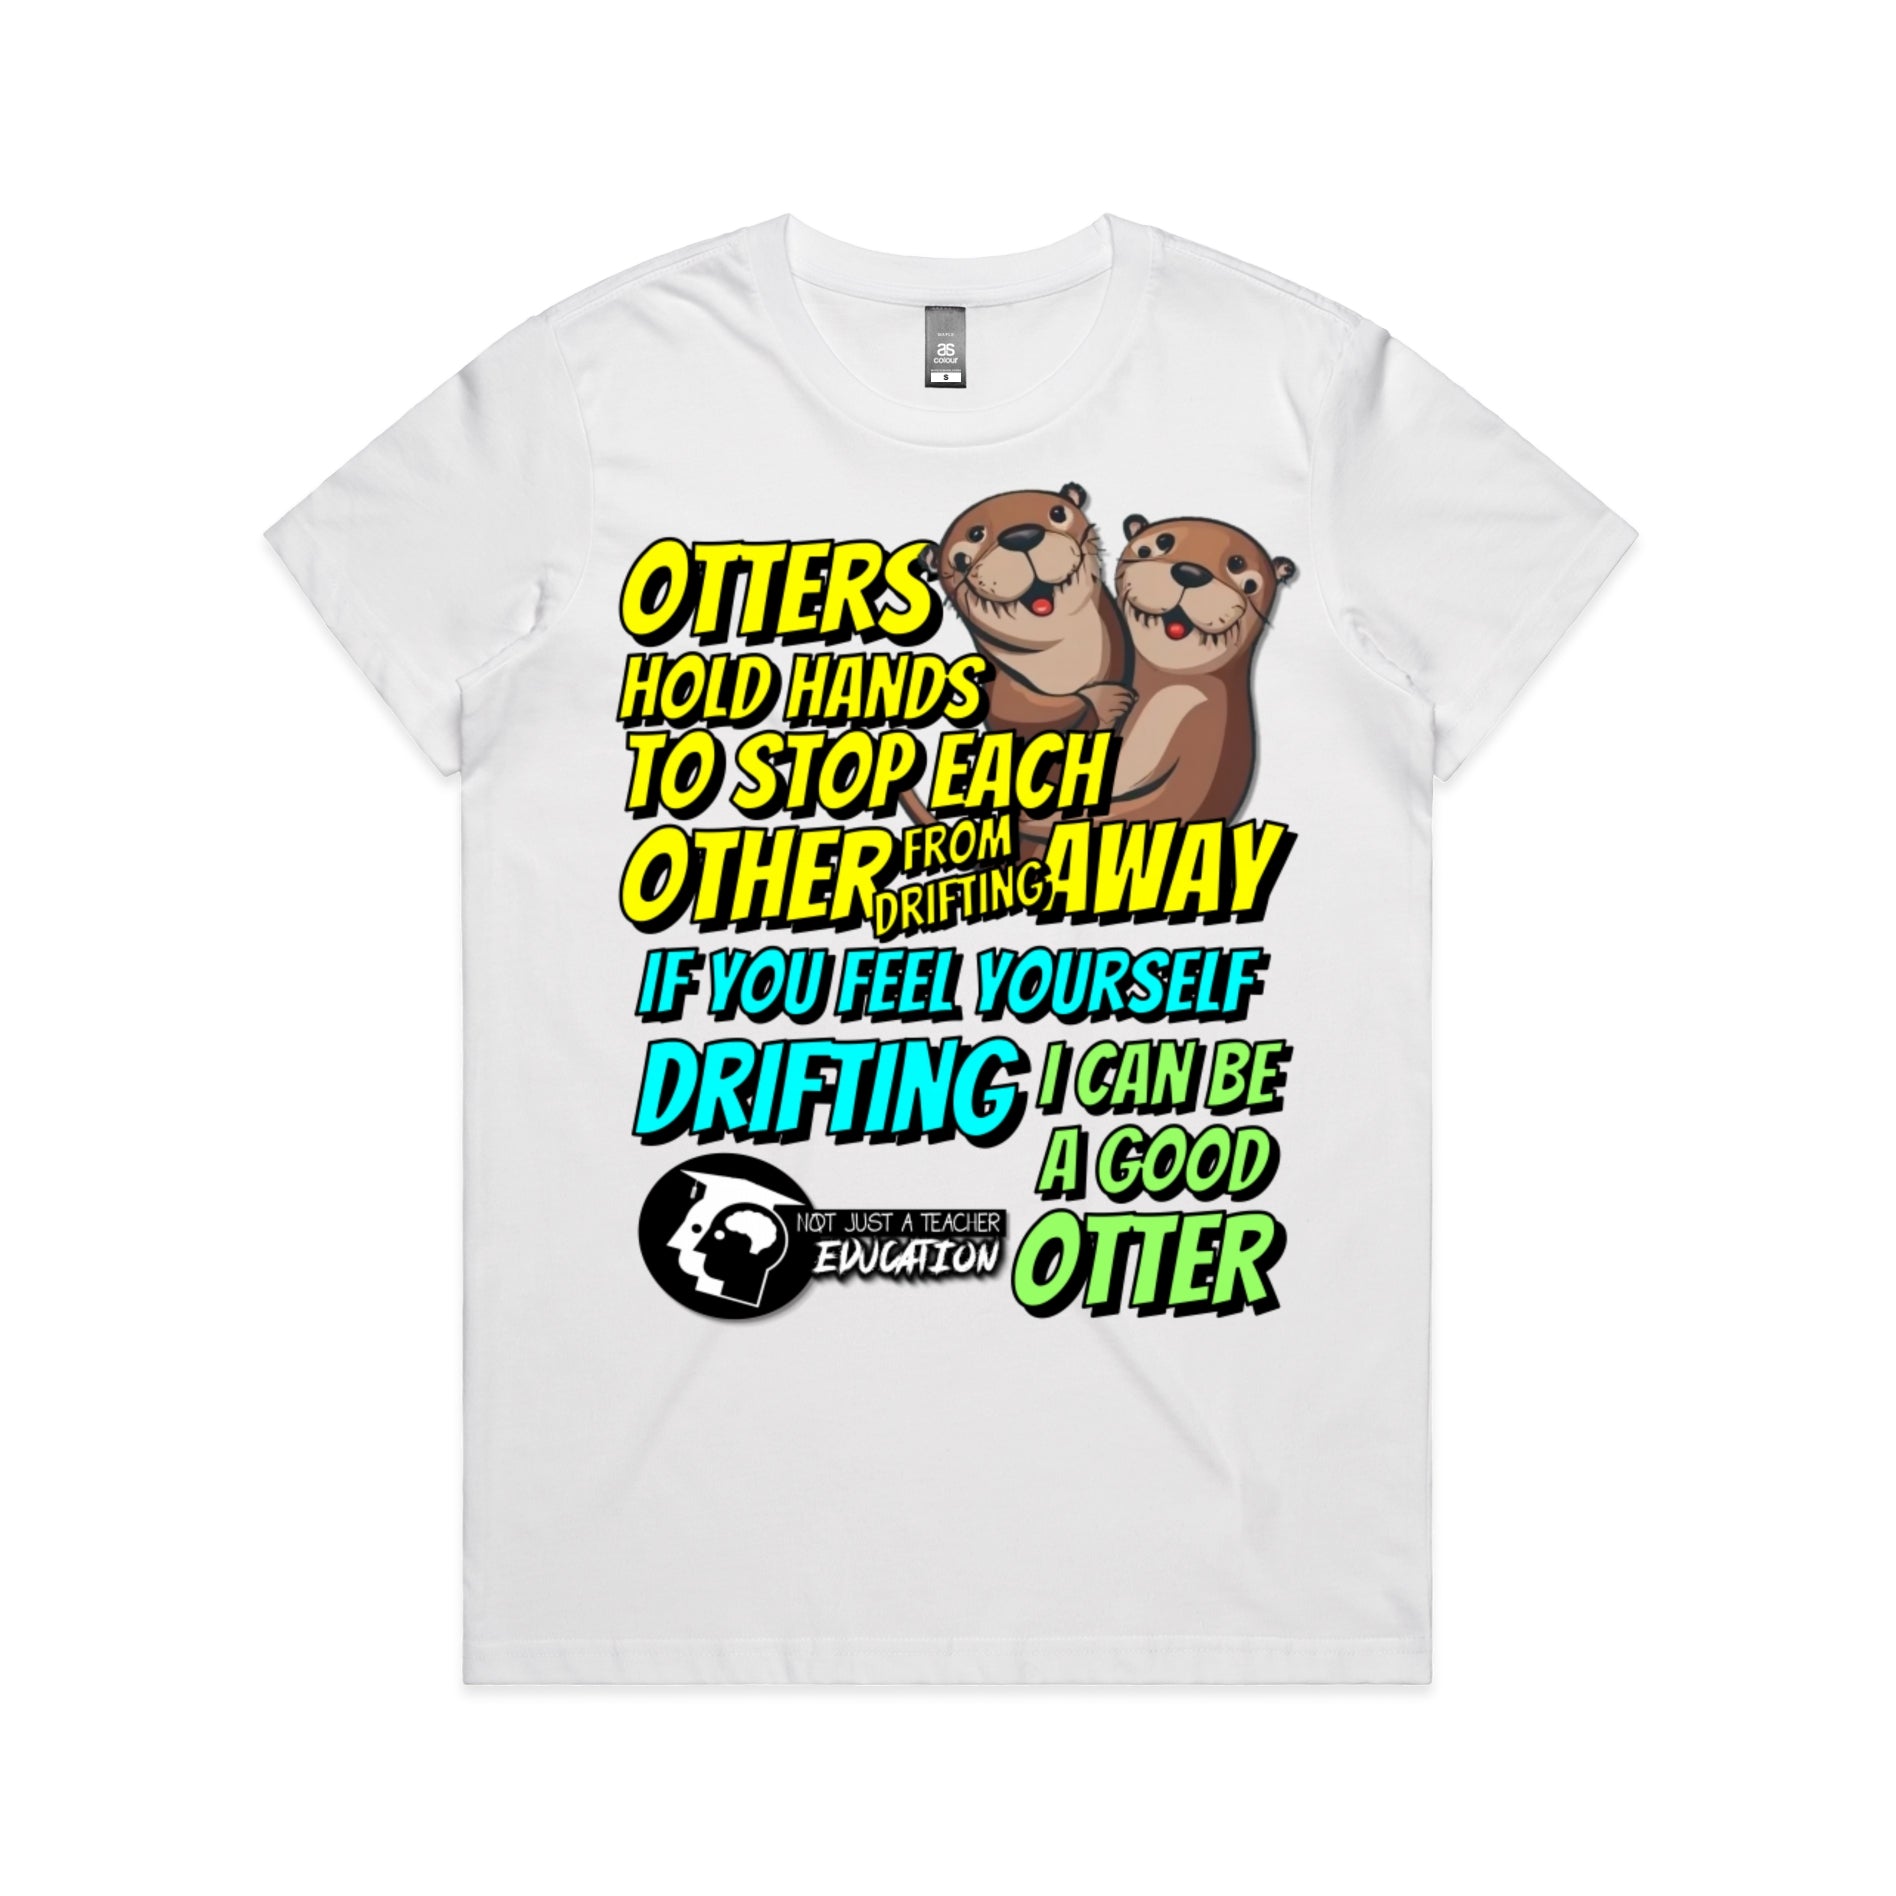 Otters Hold Hands To Stop Drifting Away Tee